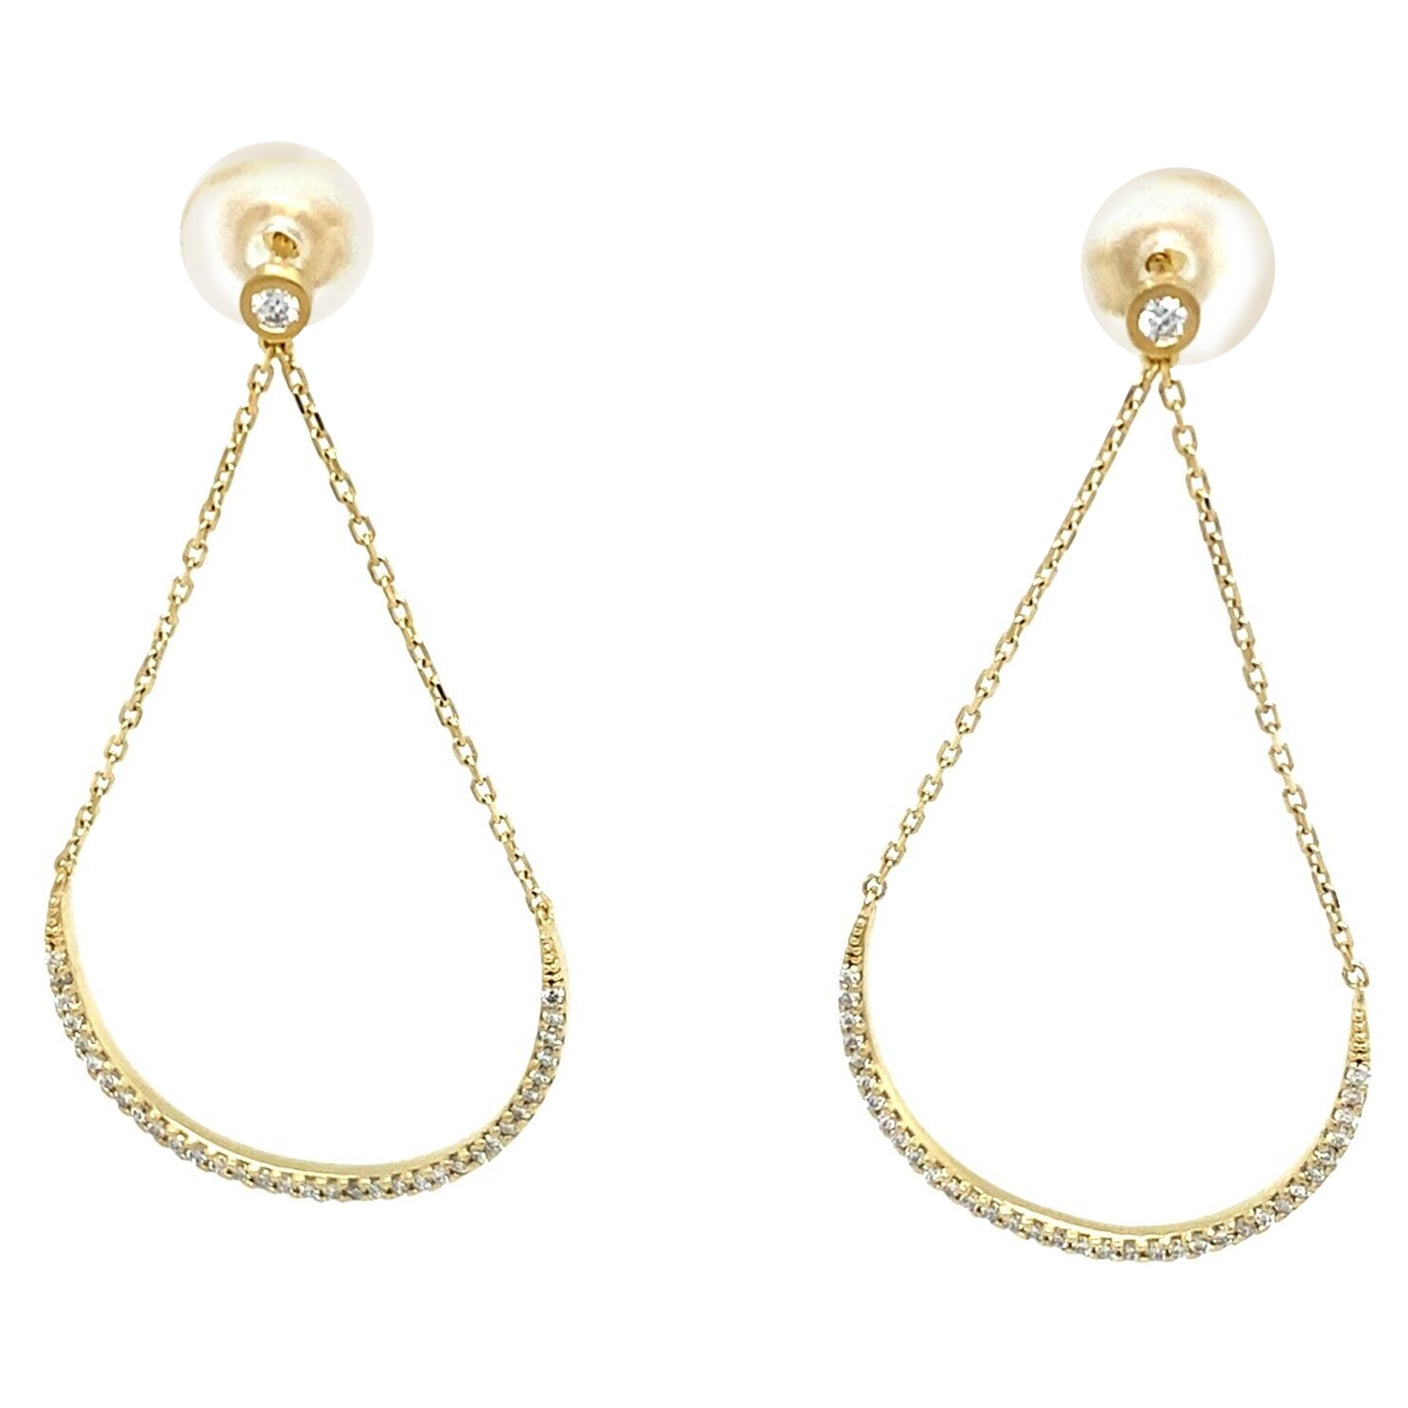 New Fine Quality Drops Earrings Set with 0.60ct of Diamonds in 18ct Yellow Gold For Sale